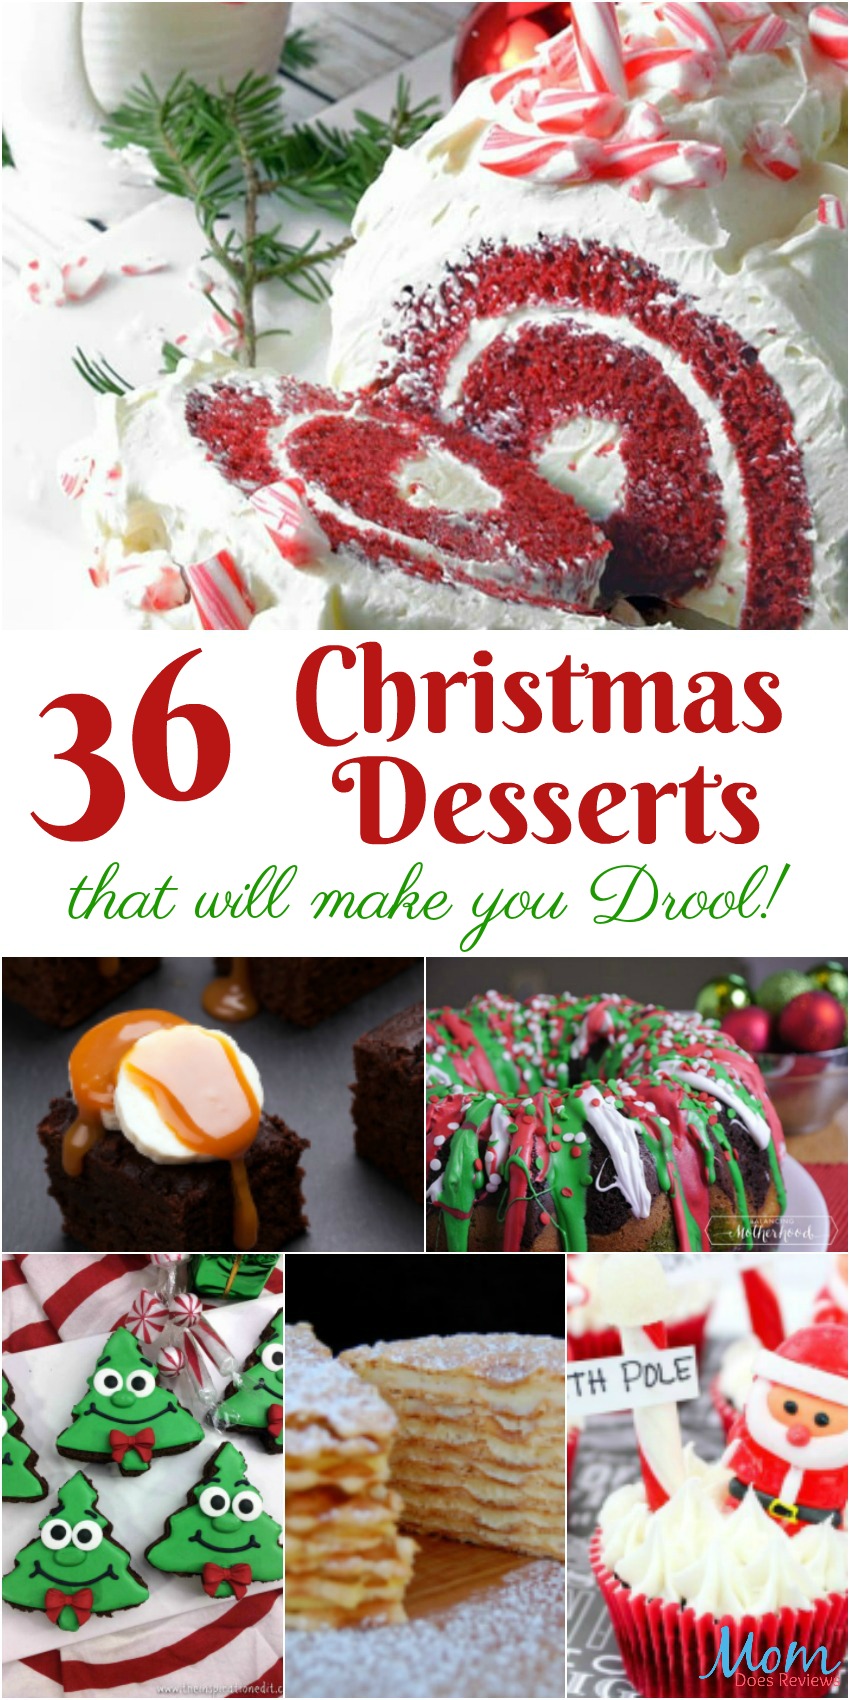 36 Christmas Desserts that will make you Drool